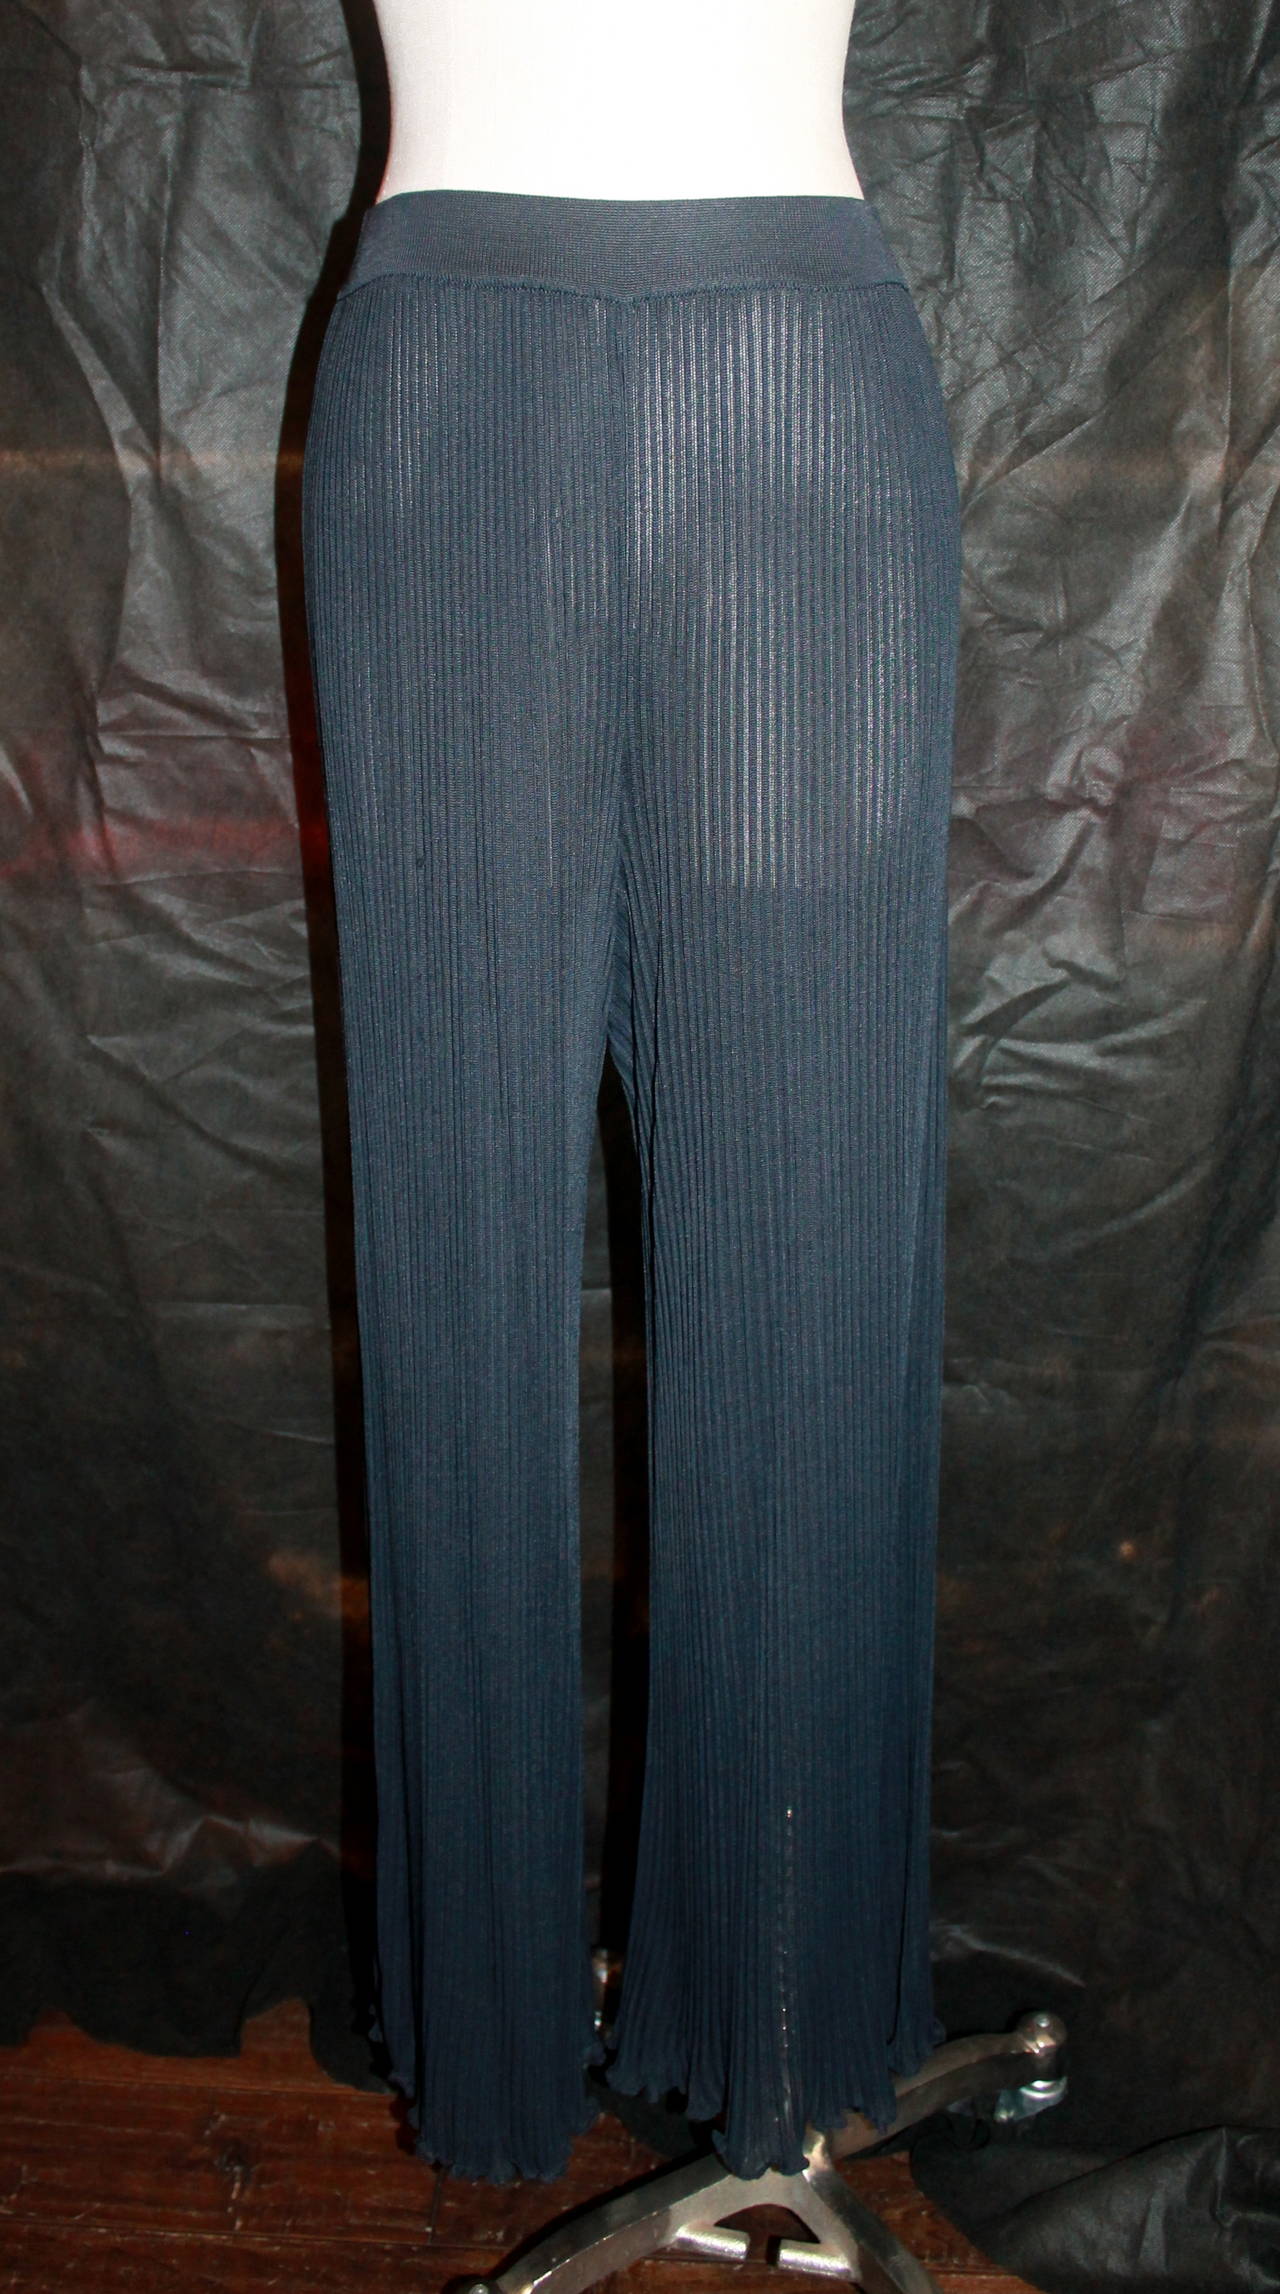 Chanel 1980's Vintage Black Pleated Palazzo Pants -  38. These pants are in good vintage condition with wear consistent with its age. There is some pulling in the front that is visible. The material is stretchy. 

Measurements:
Waist- 26